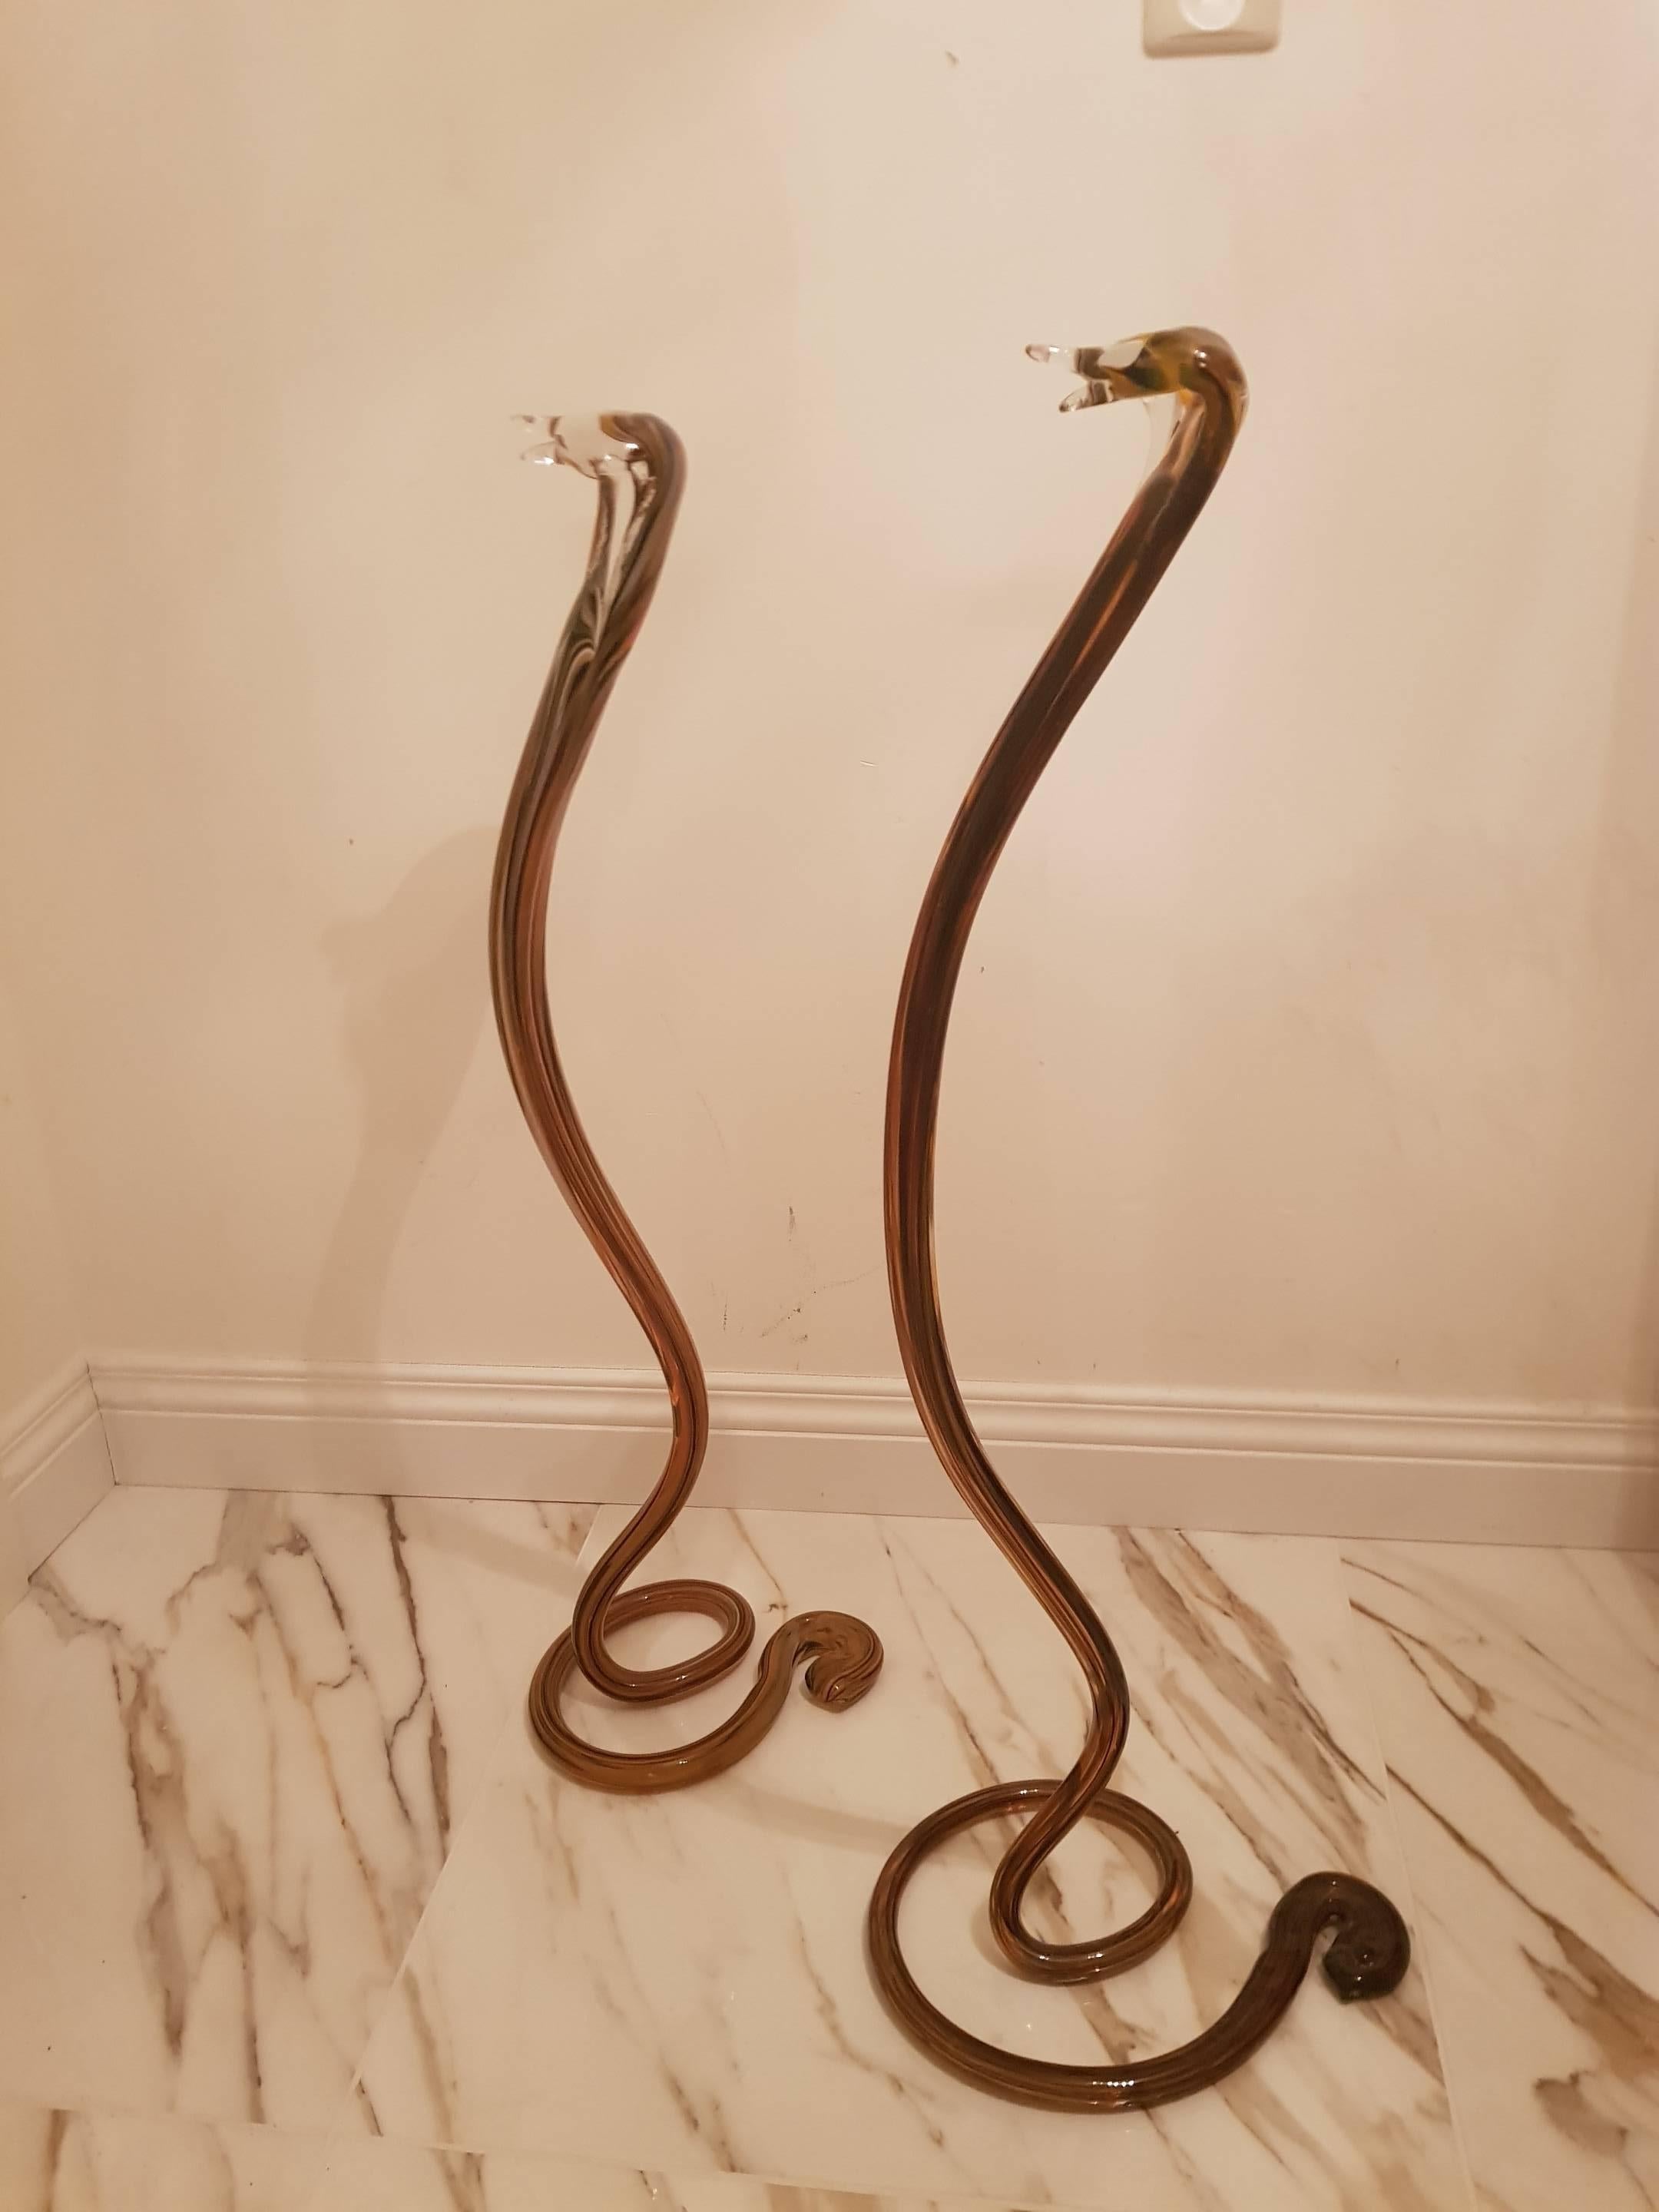 Two Murano cobras handblown and perfectly shaped to a cobra, one slightly bigger but a great pair. Unique interior items!
Dimensions:
90cm high, 25cm width, 30cm depth.
88cm high, 22cm width, 24cm depth.